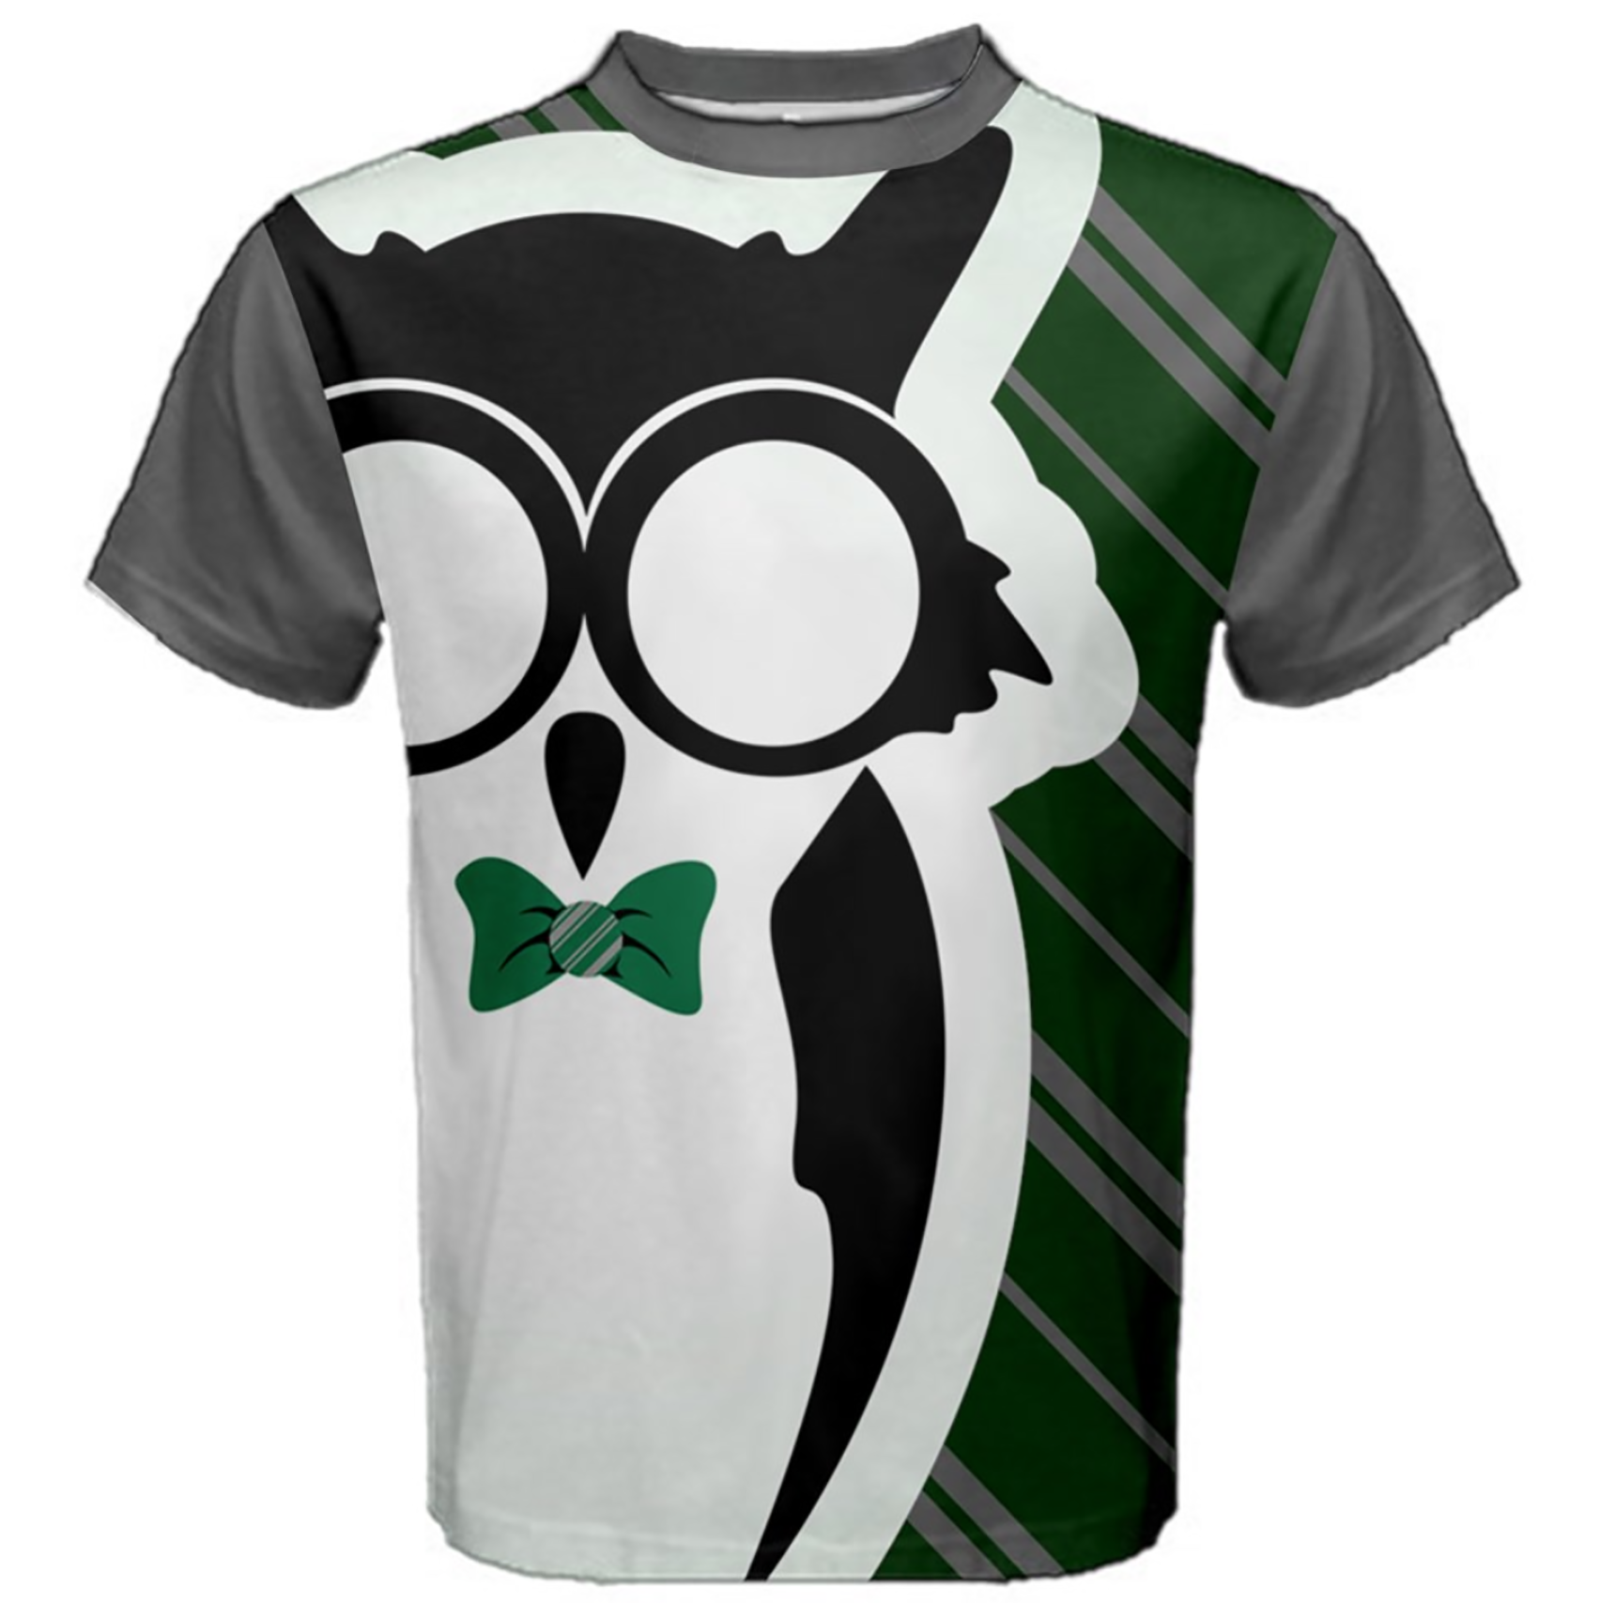 Owl Striped (Unisex) Cotton Tee - Inspired by Slytherin House